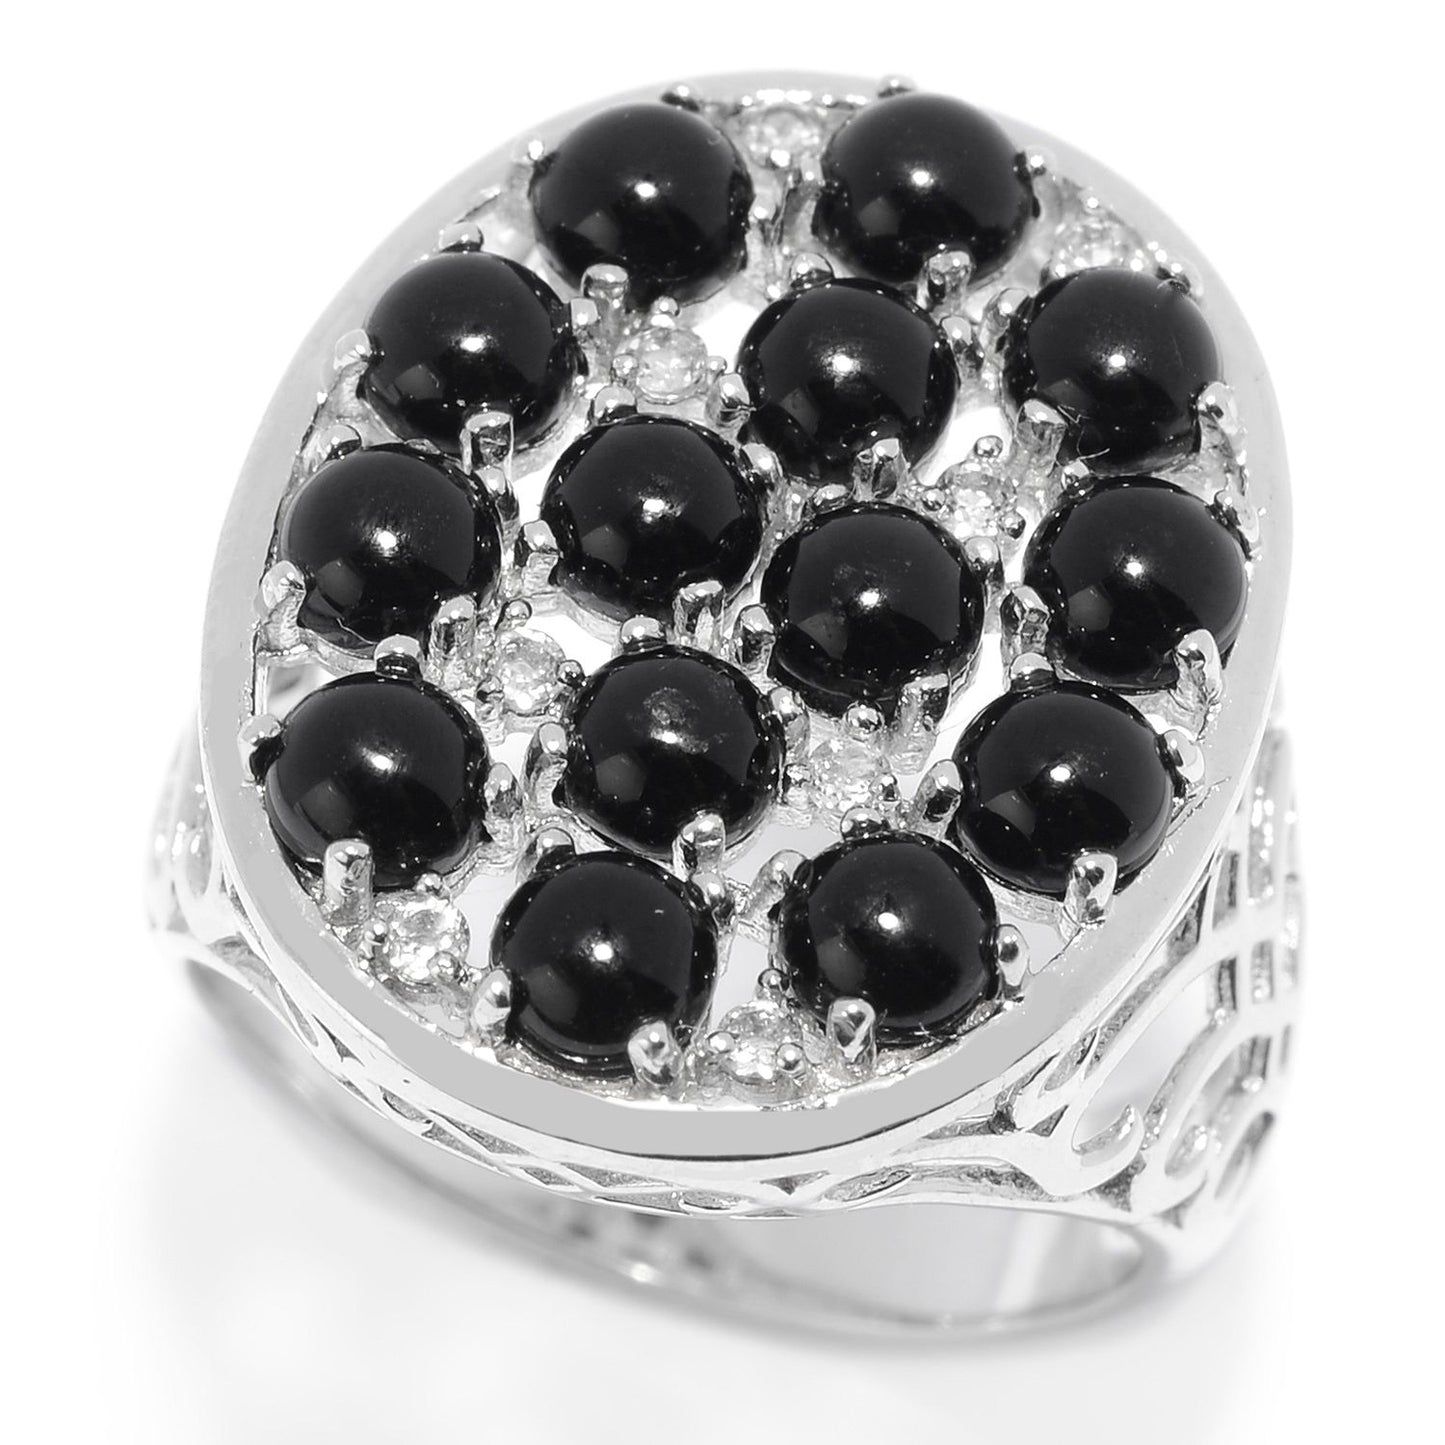 Pinctore Sterling Silver Black Onyx & White Topaz Oval Shaped Ring - pinctore